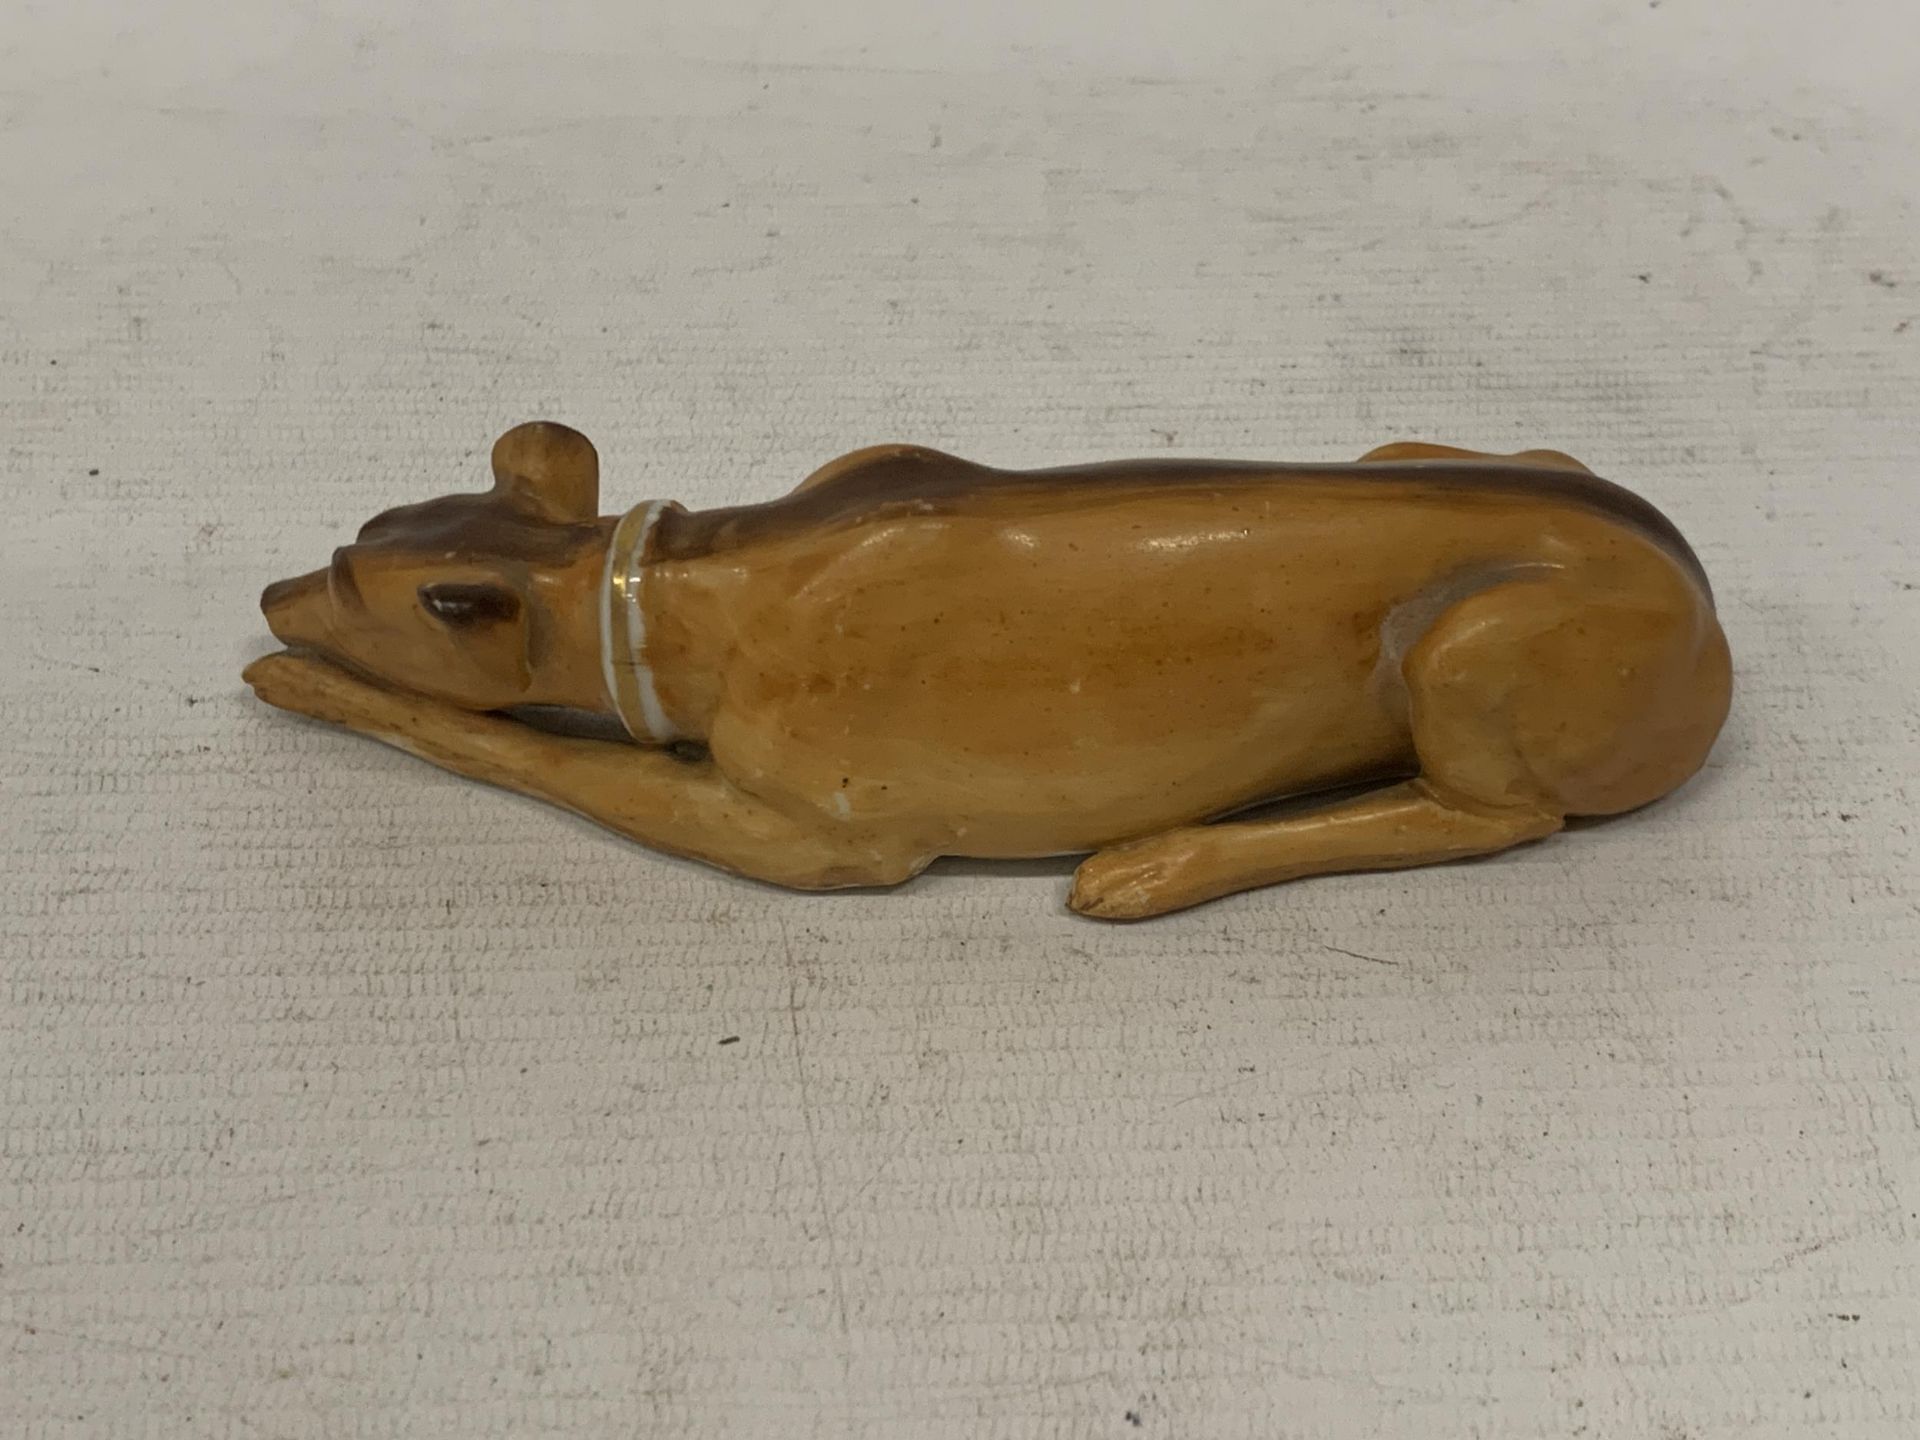 A POSSIBLY DOULTON UNMARKED LYING DOWN DOG ANIMAL FIGURE - Image 2 of 3